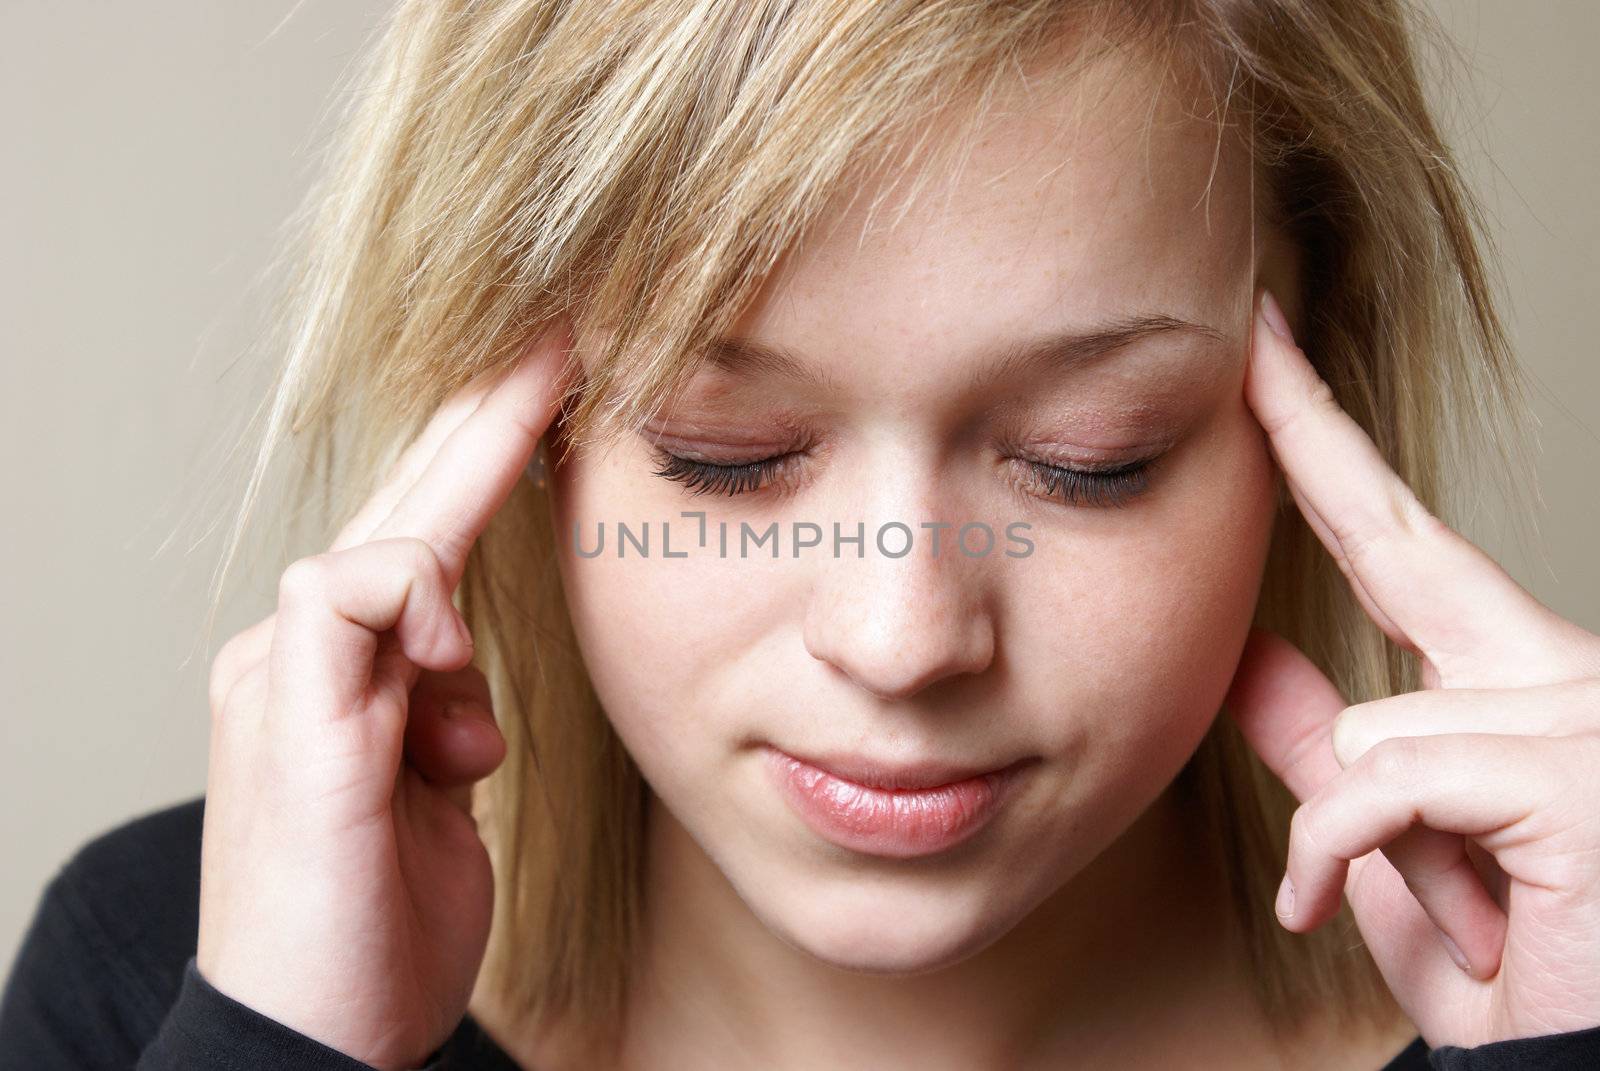 A young woman relieves the pain from her headache by putting pressure on her temples.